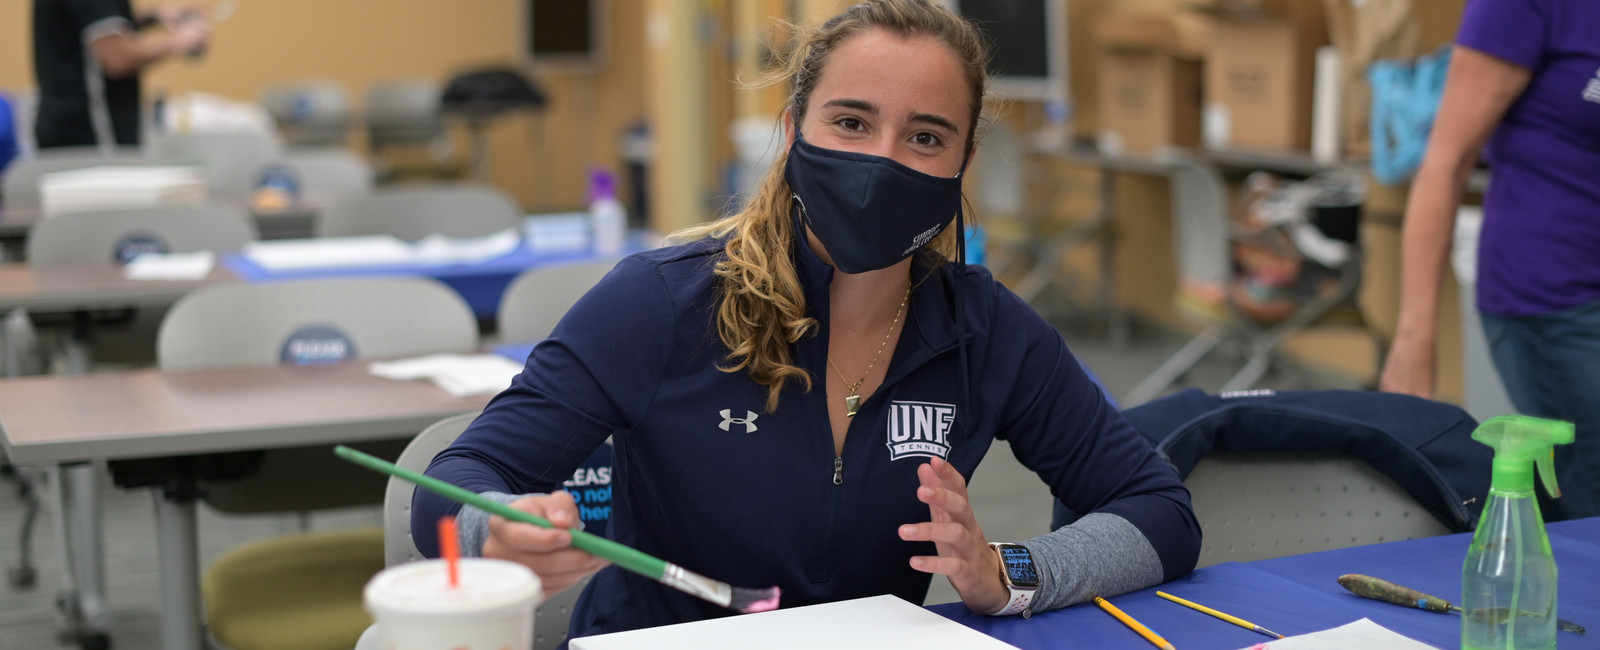 Female student wearing a face mask and UNF jacket sitting in a classroom holding a paint brush